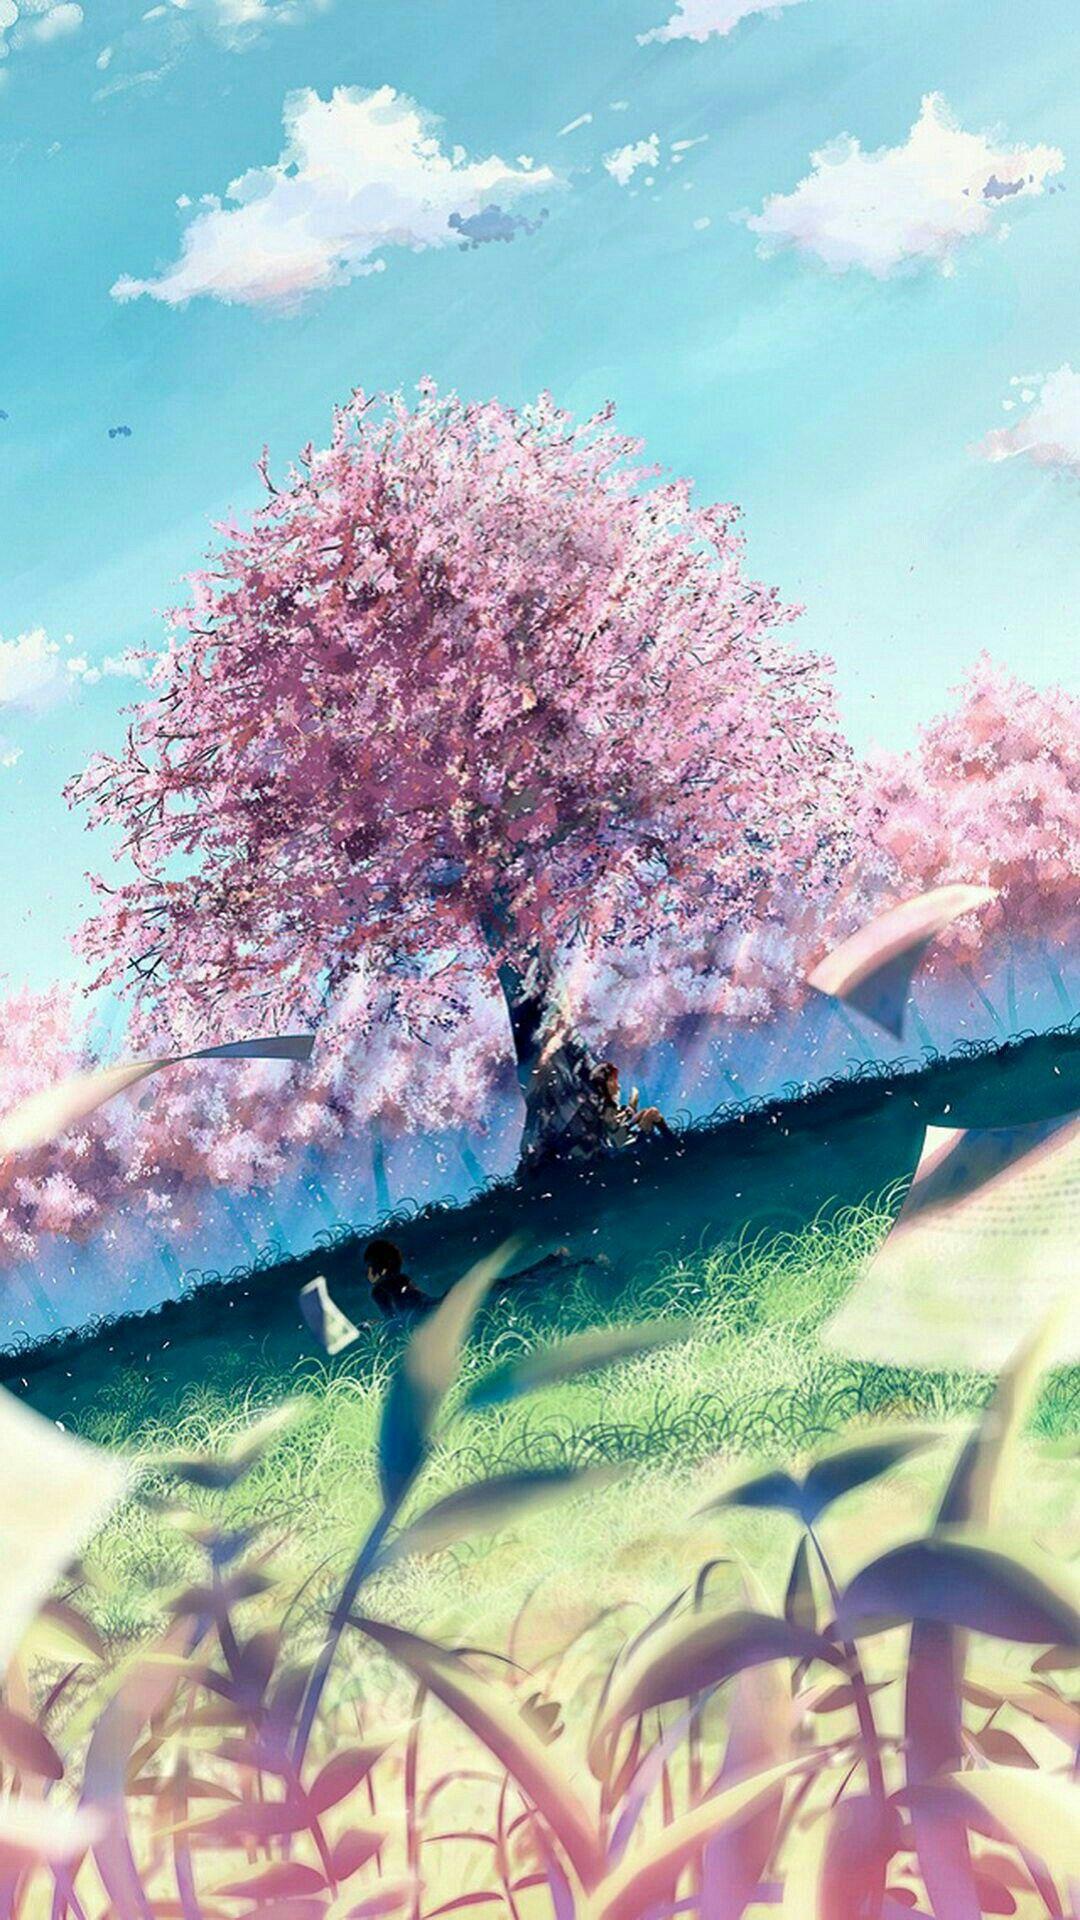 This is like my favourite wallpaper.I love cherry blossom